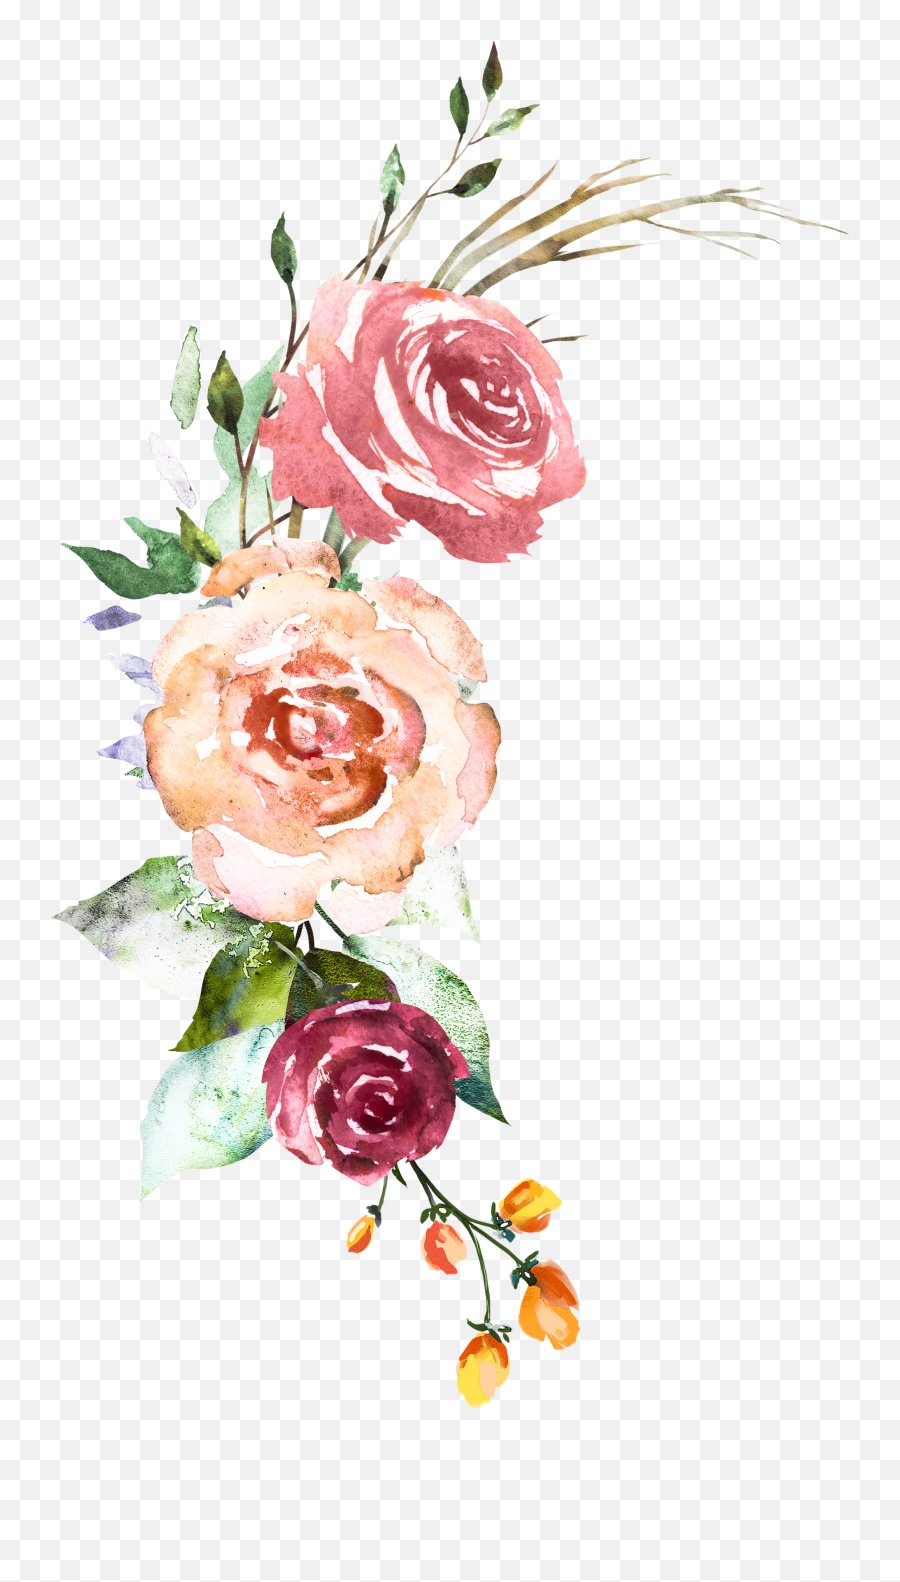 Download Garden Roses Hd Png - Uokplrs,Watercolor Flowers Png